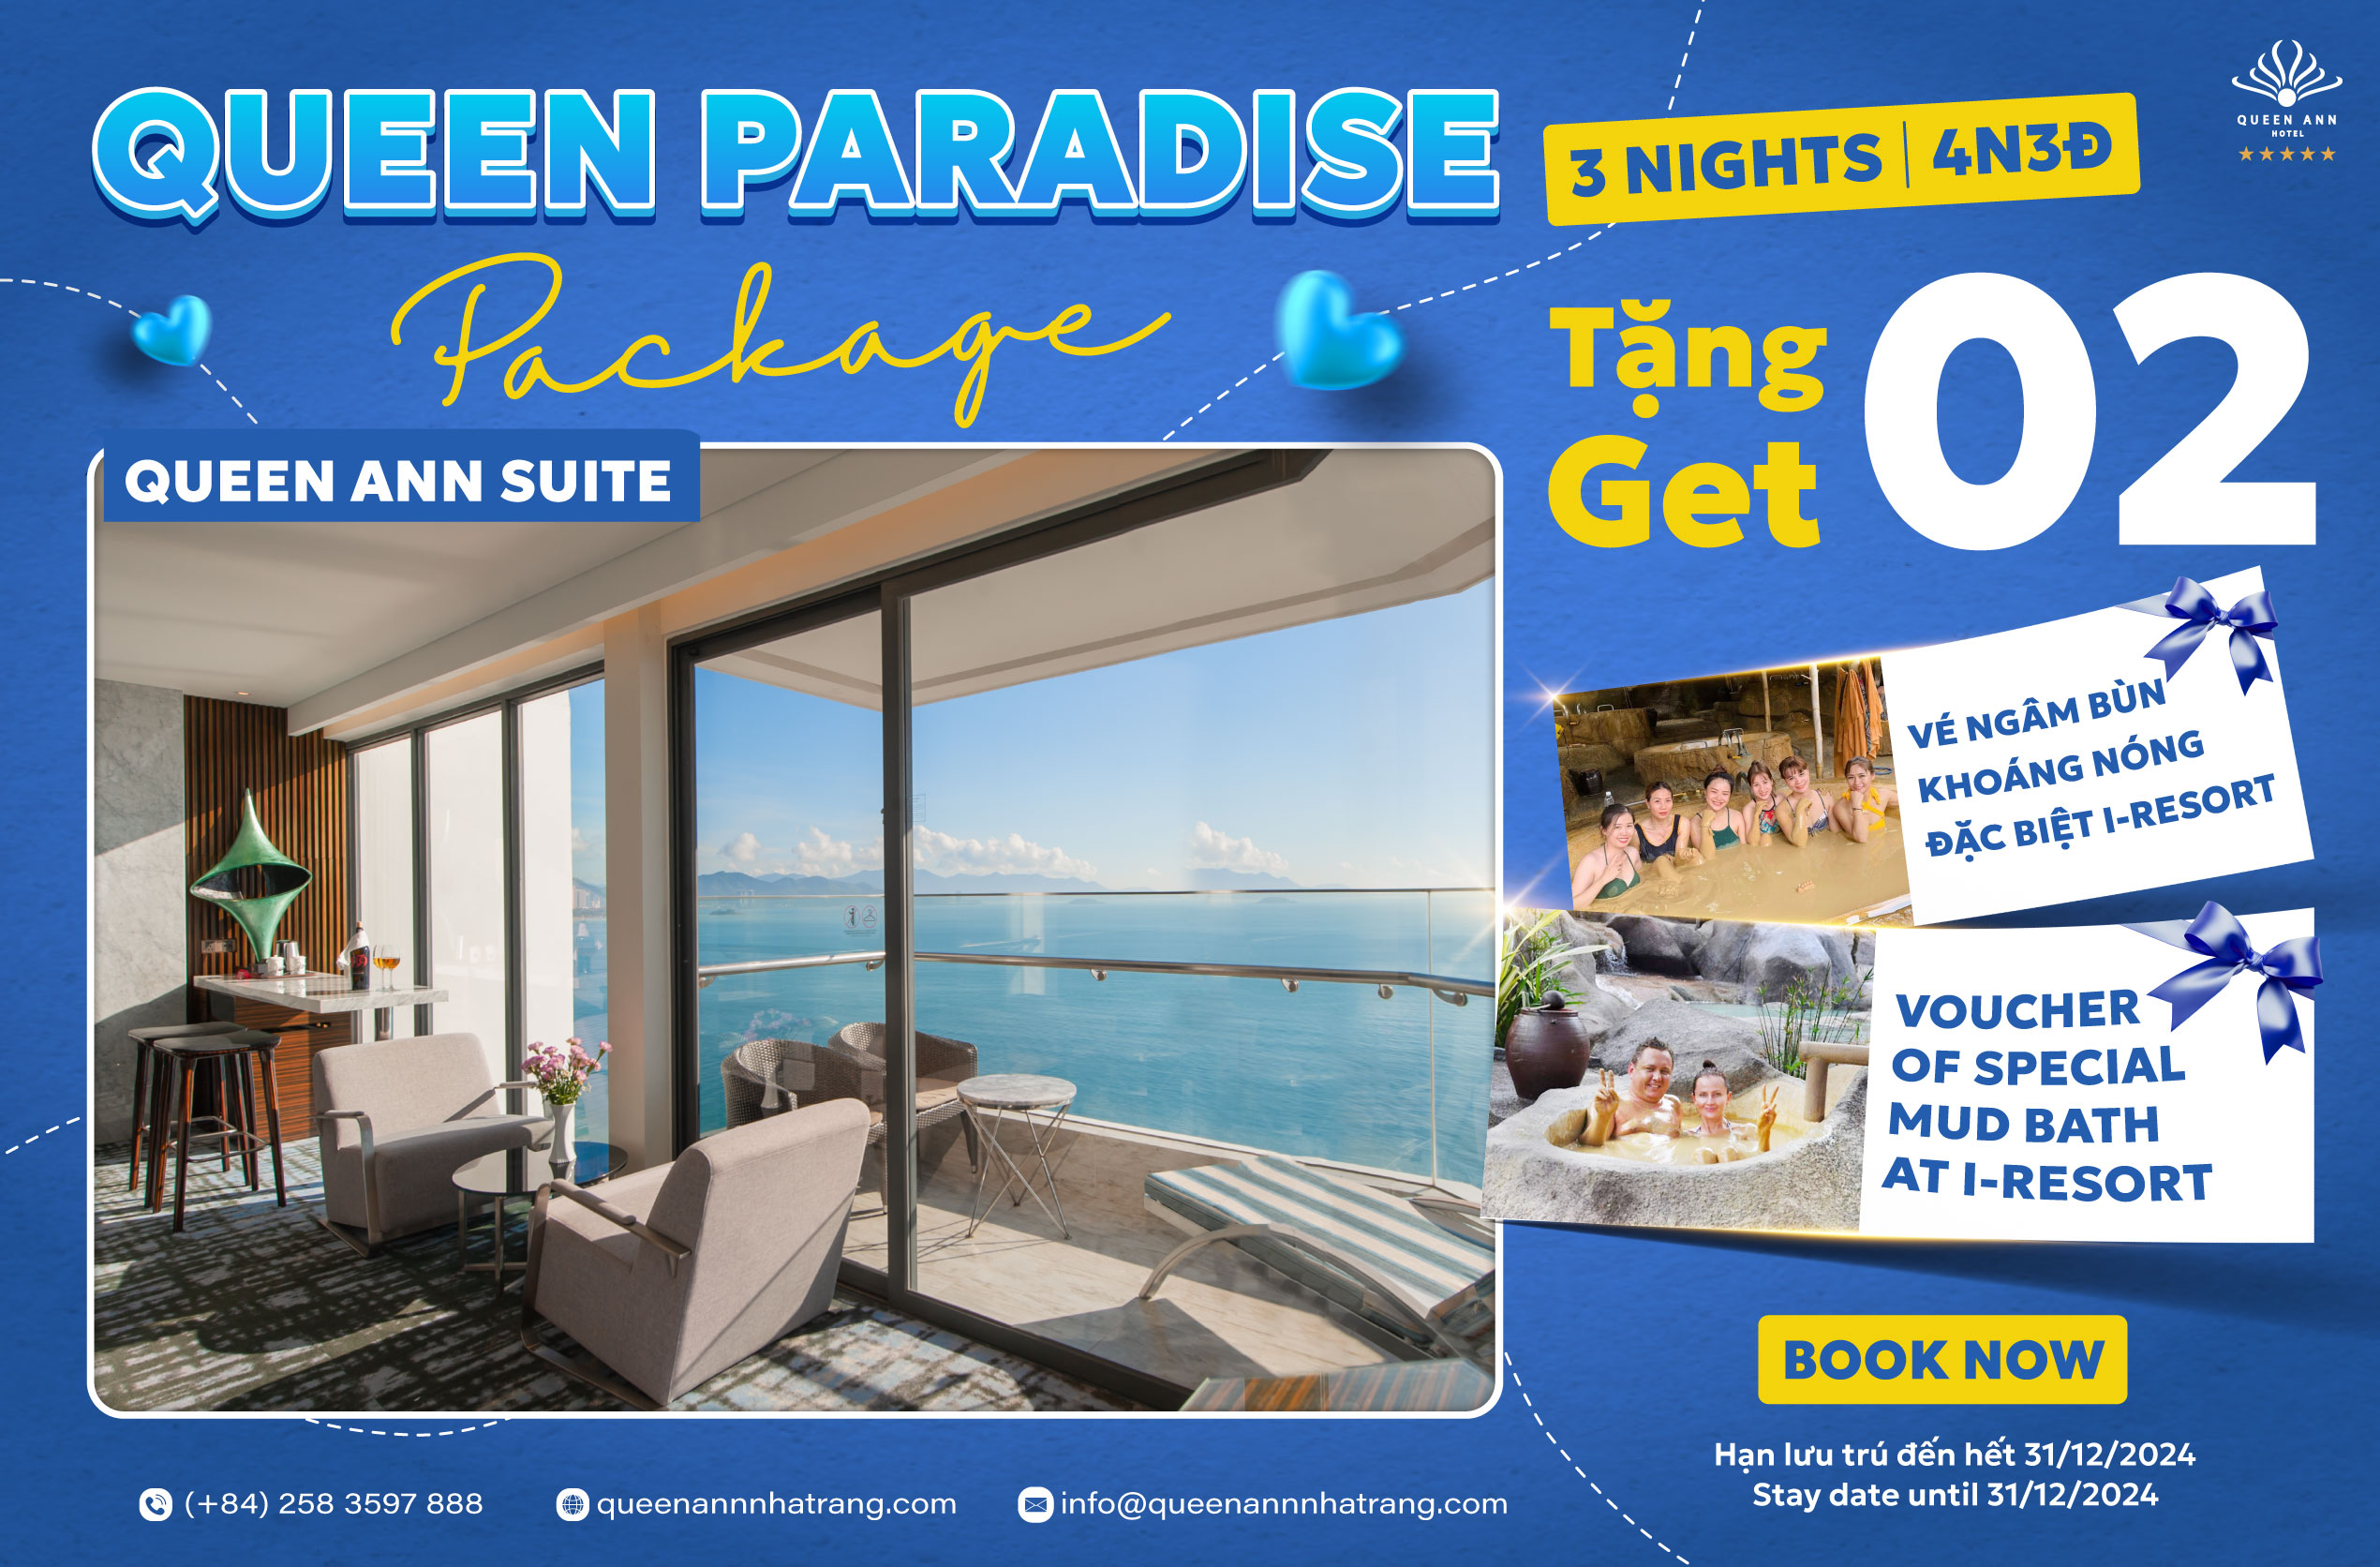 QUEEN PARADISE PACKAGE - LUXURY STAY COMBINED WITH RELAXING HOT MUD BATH EXPERIENCE